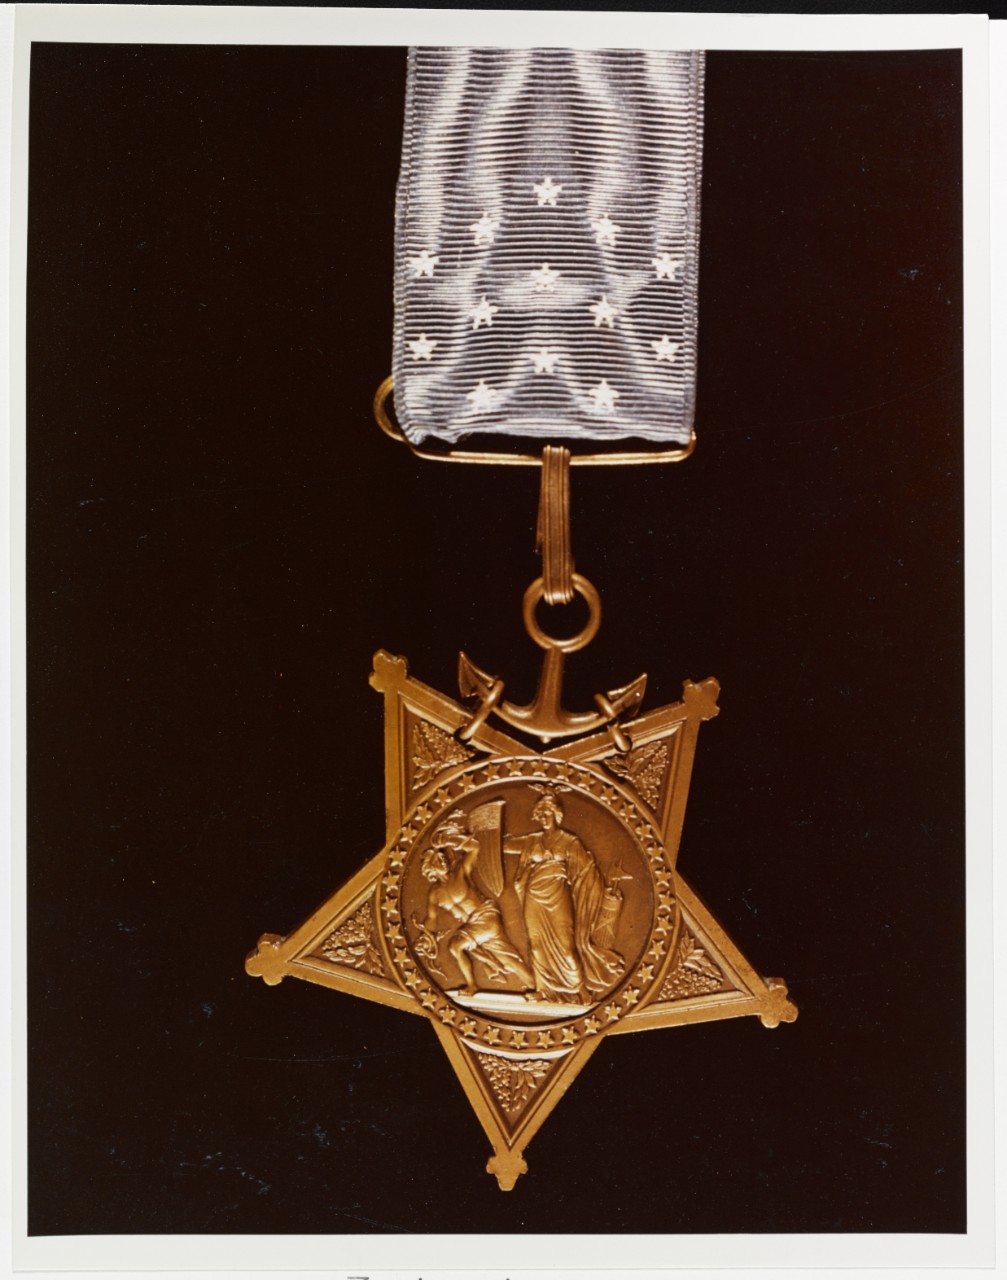 Photo #: NH 95030-KN (Color) U.S. Navy Medal of Honor